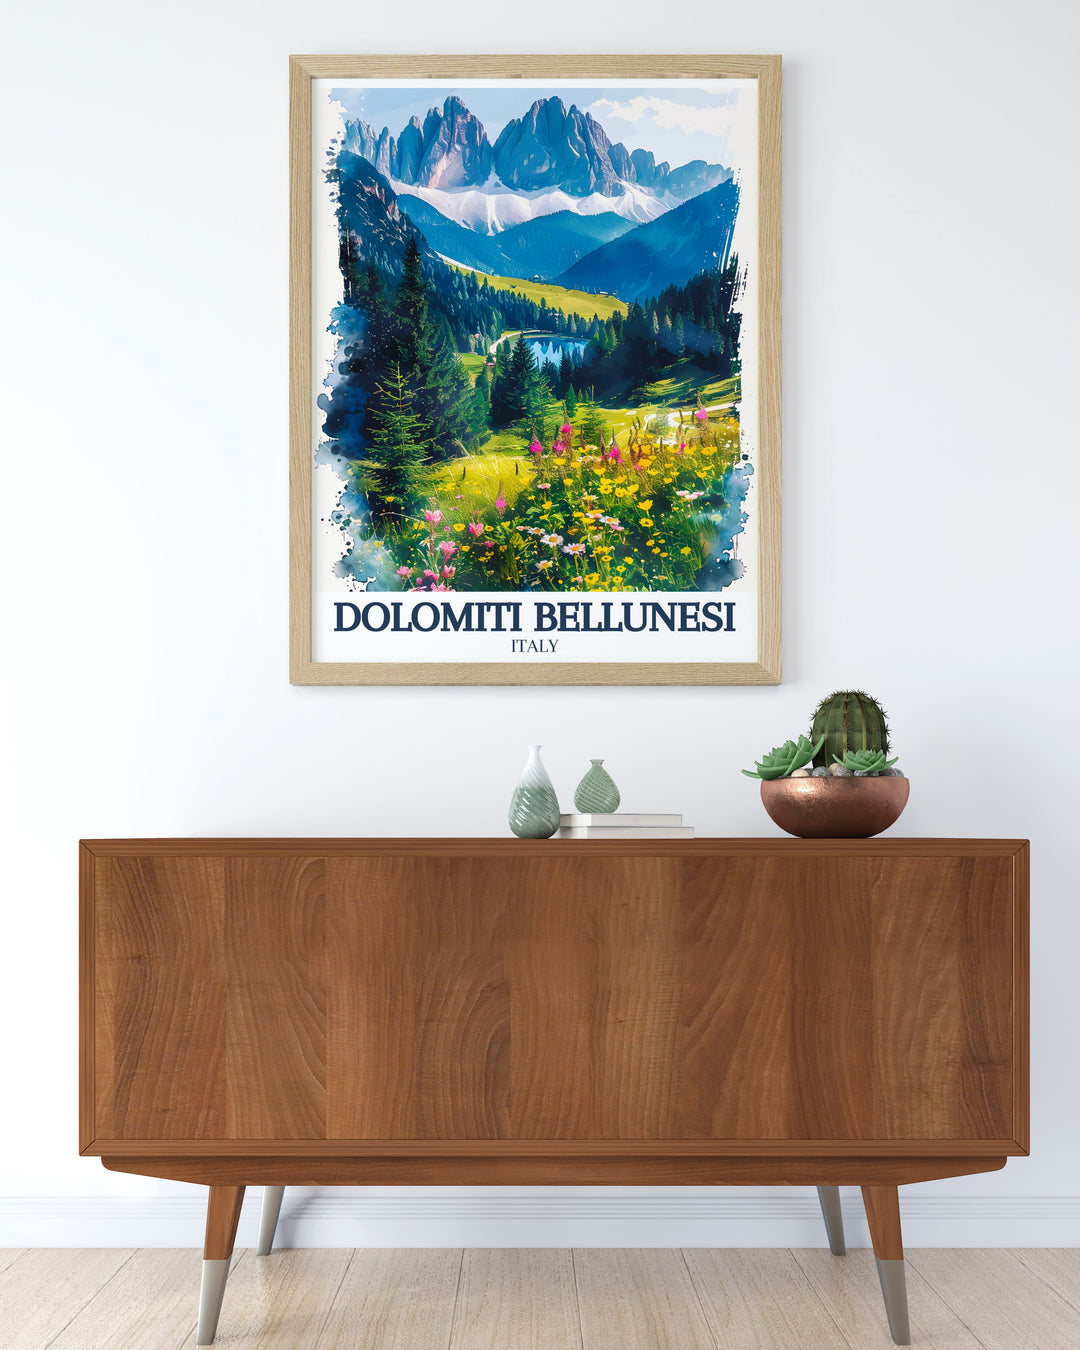 Vintage travel print of the Dolomite range showcasing the rugged charm and natural splendor of the Dolomiti Bellunesi ideal for adding a touch of nostalgia to your space.